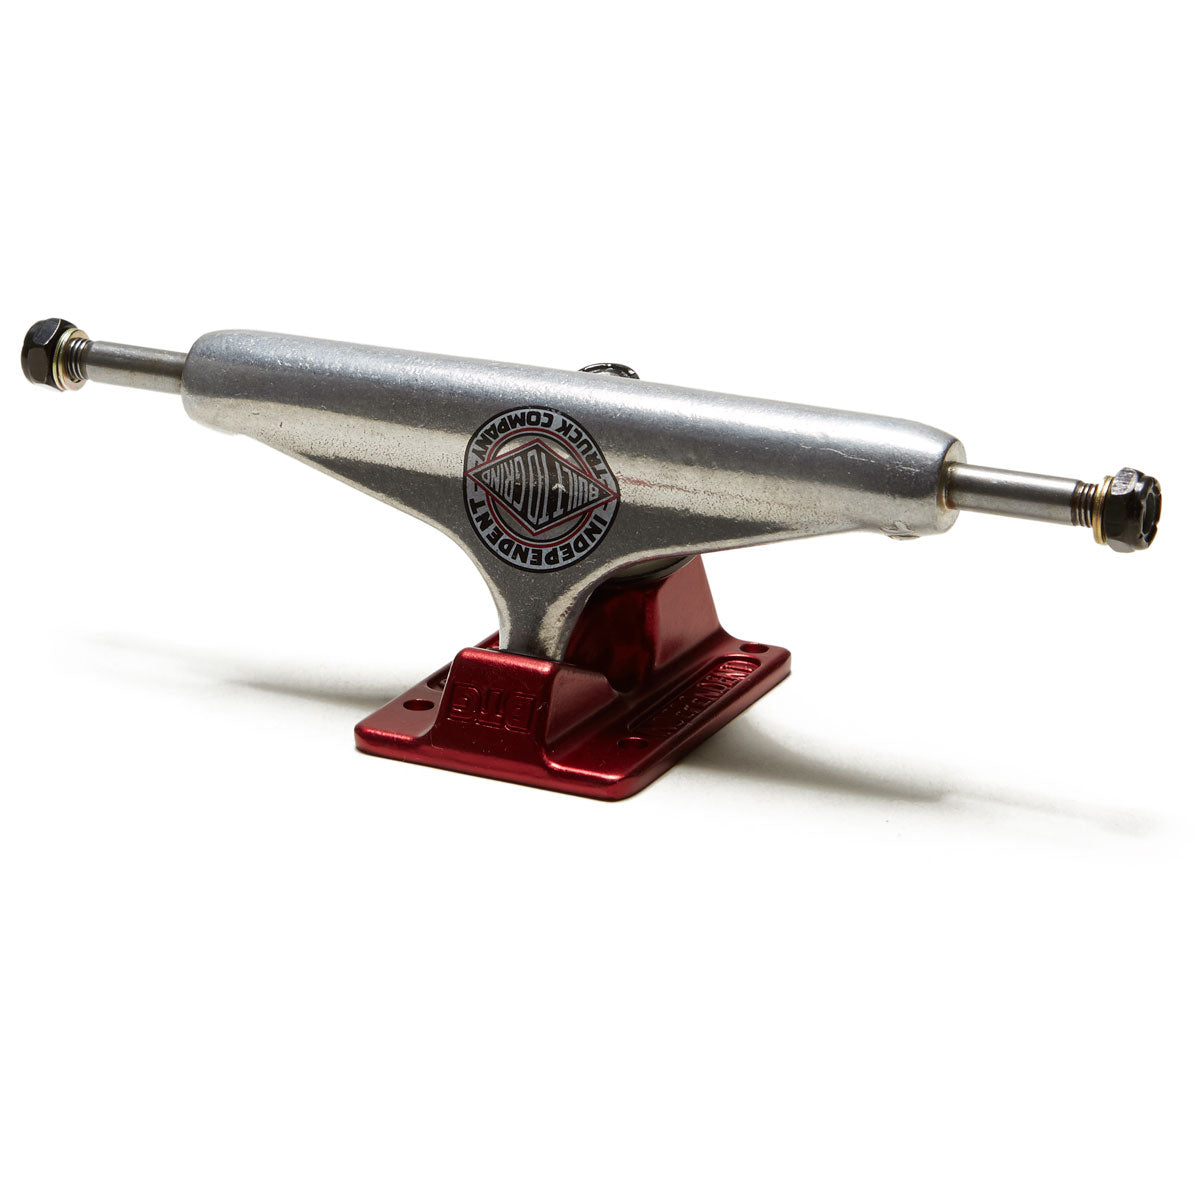 Independent Stage 11 Forged Hollow BTG Summit Standard Skateboard Trucks - Silver/Ano Red - 149mm